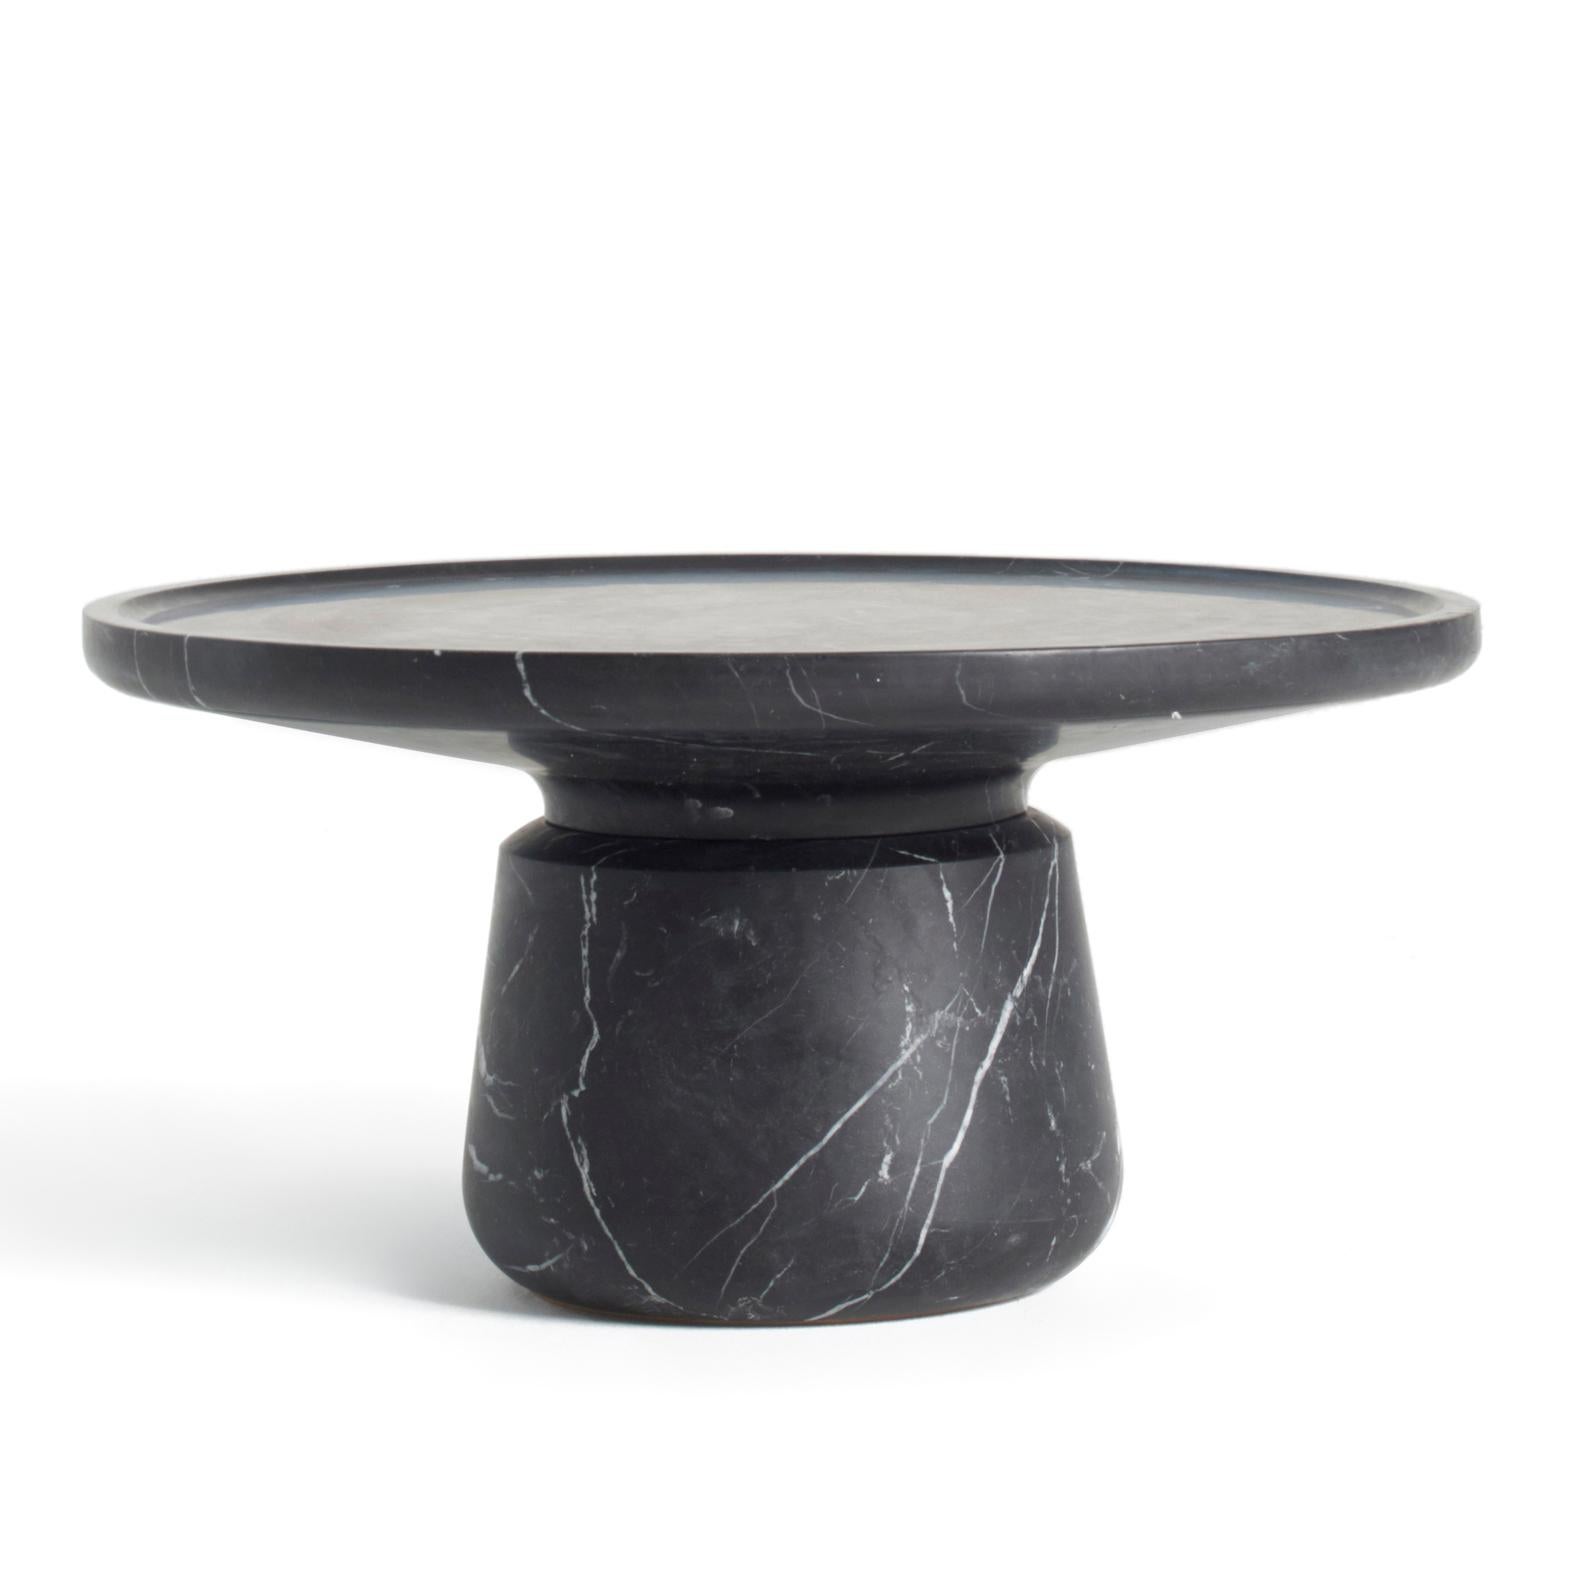 Large Marble Altana side table by Ivan Colominas
Dimensions: 75 x 36 cm
Materials: Nero Marquinia

Ivan Colominas studied Industrial Design at the UCH-CEU in Valencia, where he also attained a Master’s of Transportation Design. The collaboration